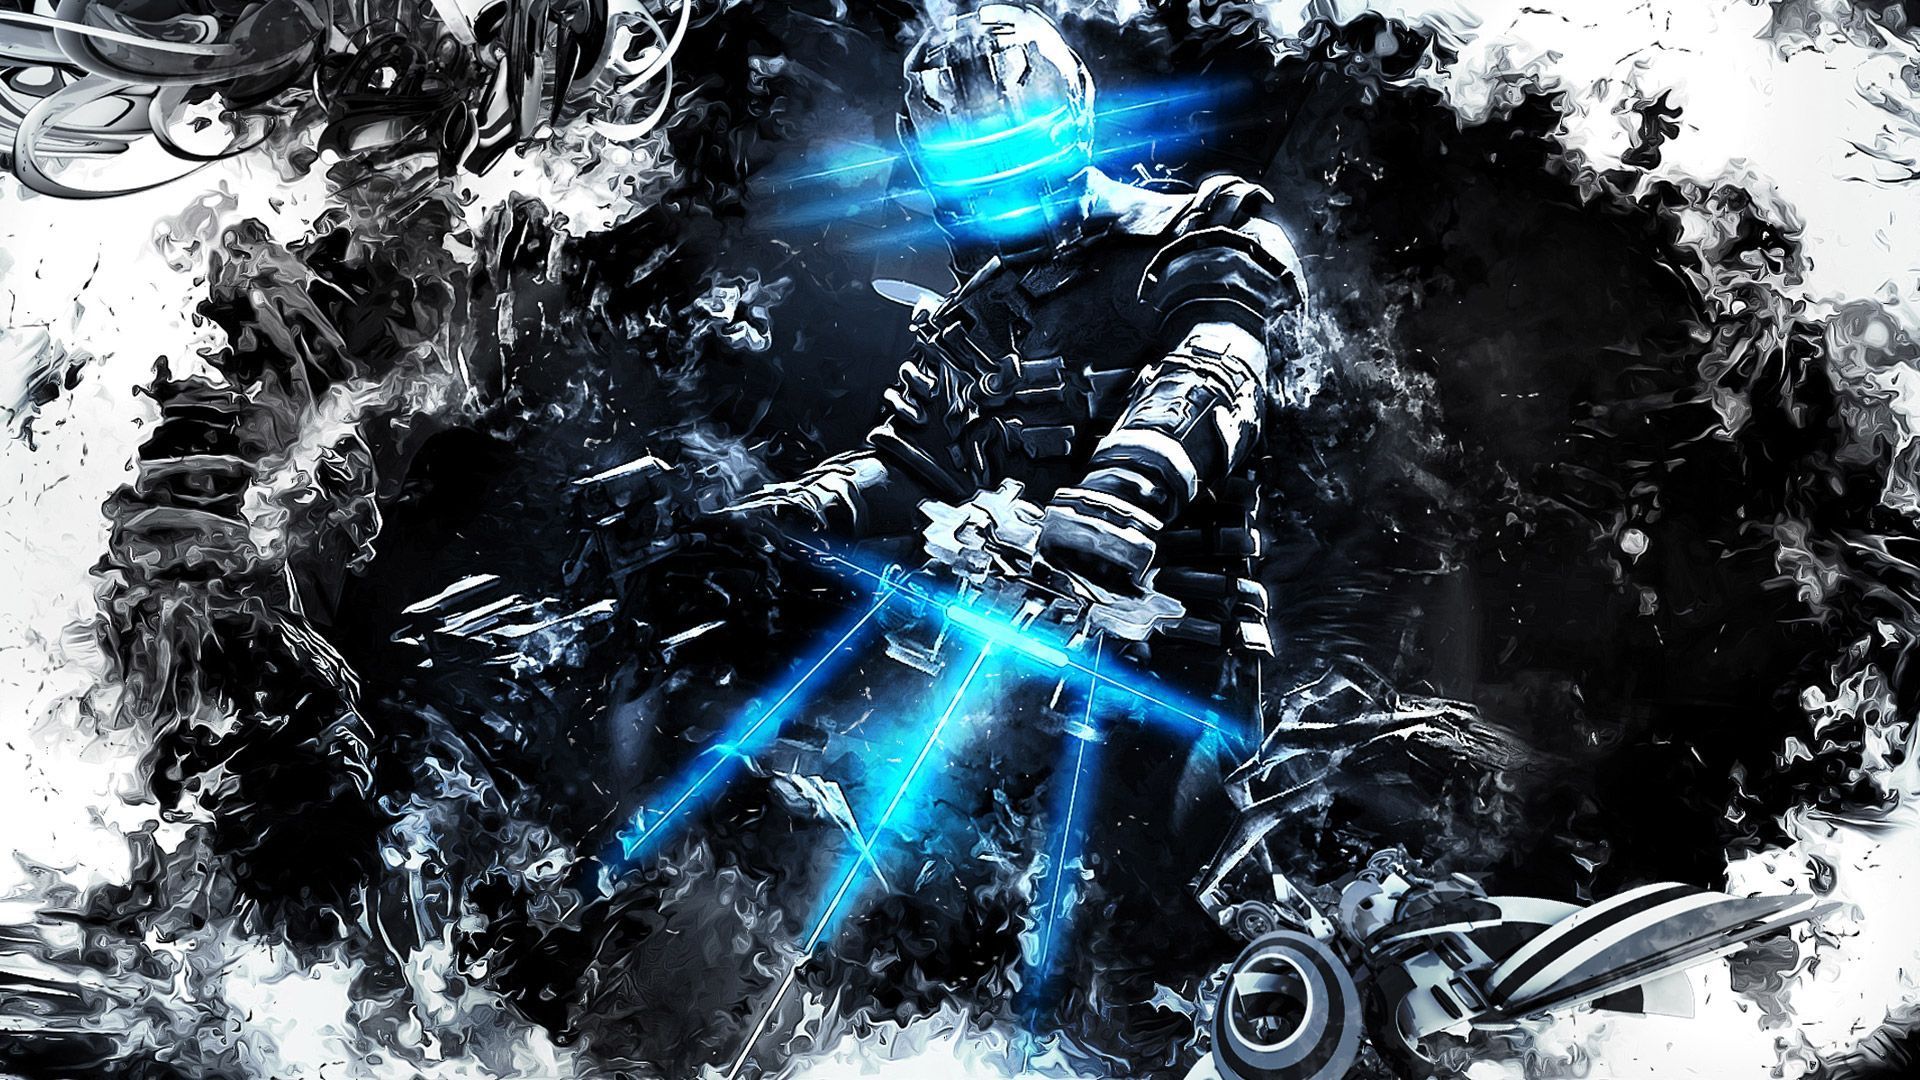 Awesome Dead Space 3 wallpaper | 1920x1080 | #25290